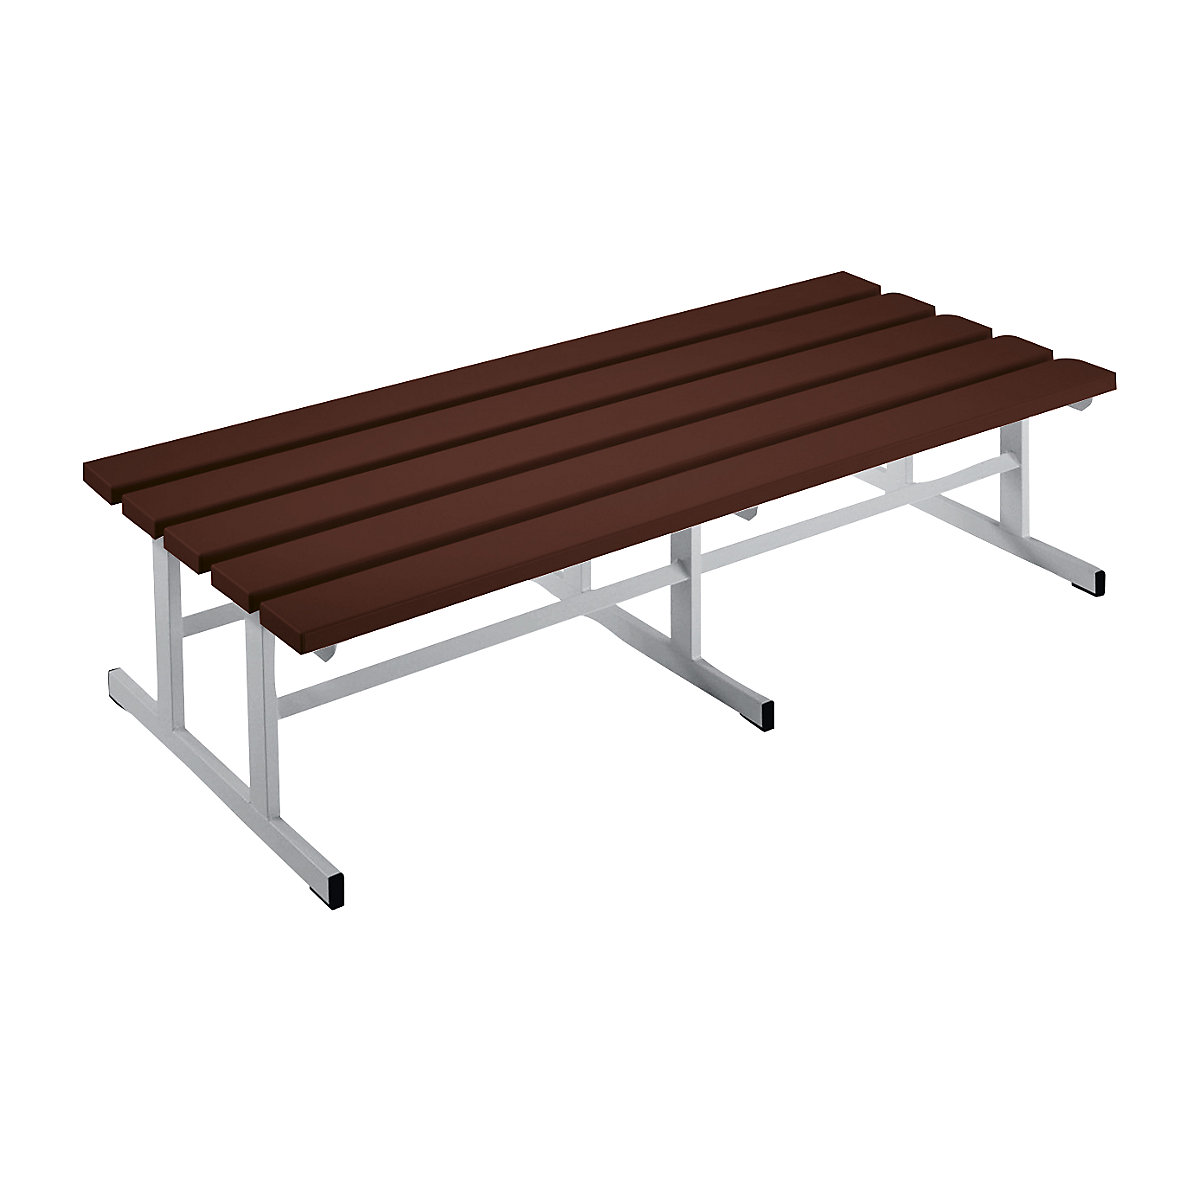 Wolf – Cloakroom bench, double sided seat, brown, 1500 mm length